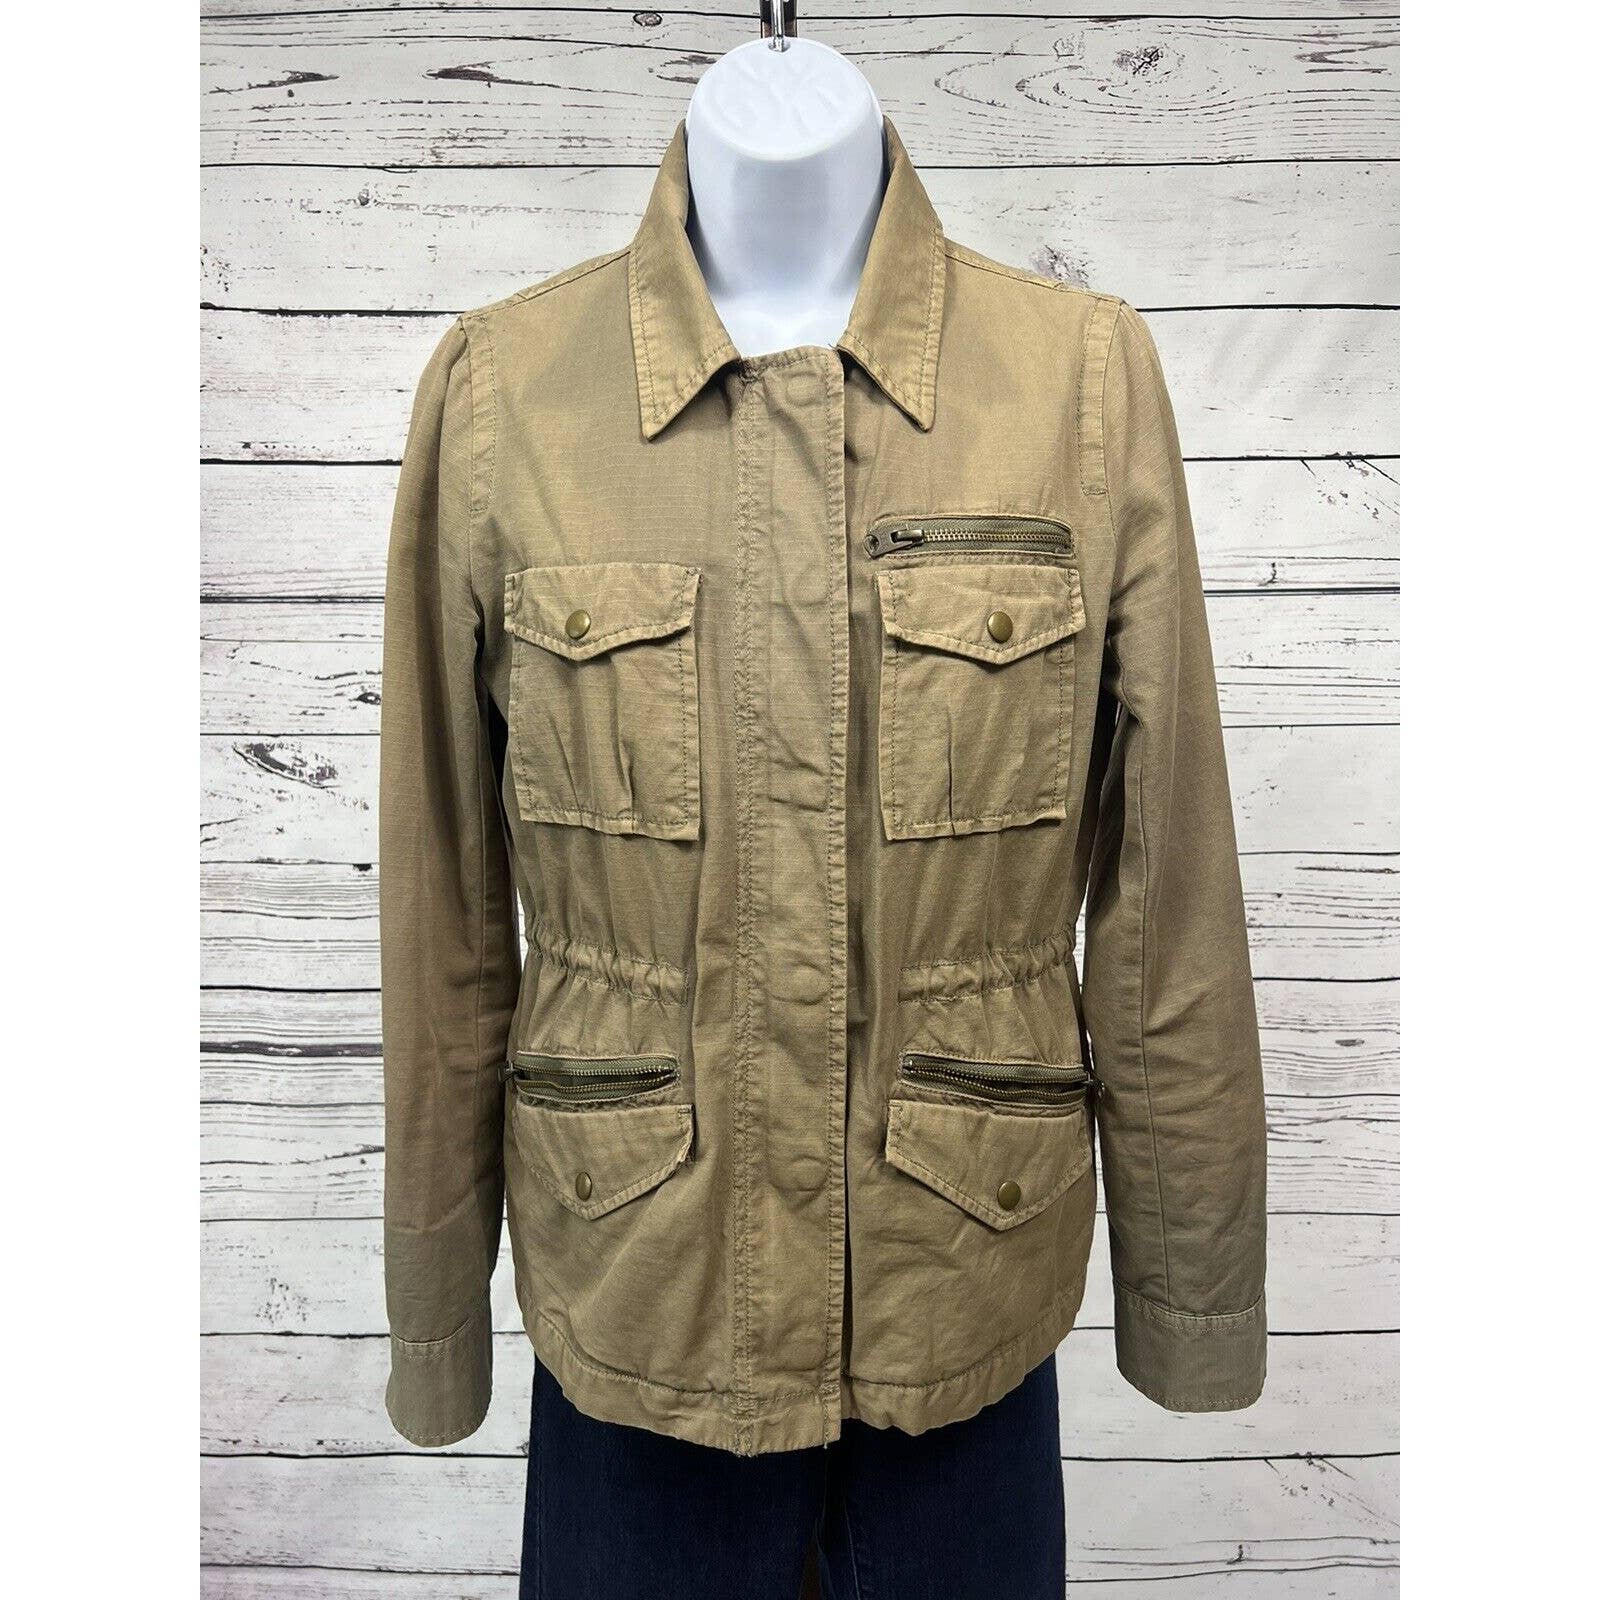 J Crew Military Jacket Womens Extra Small Brown Zip Utility Distressed Casual XS